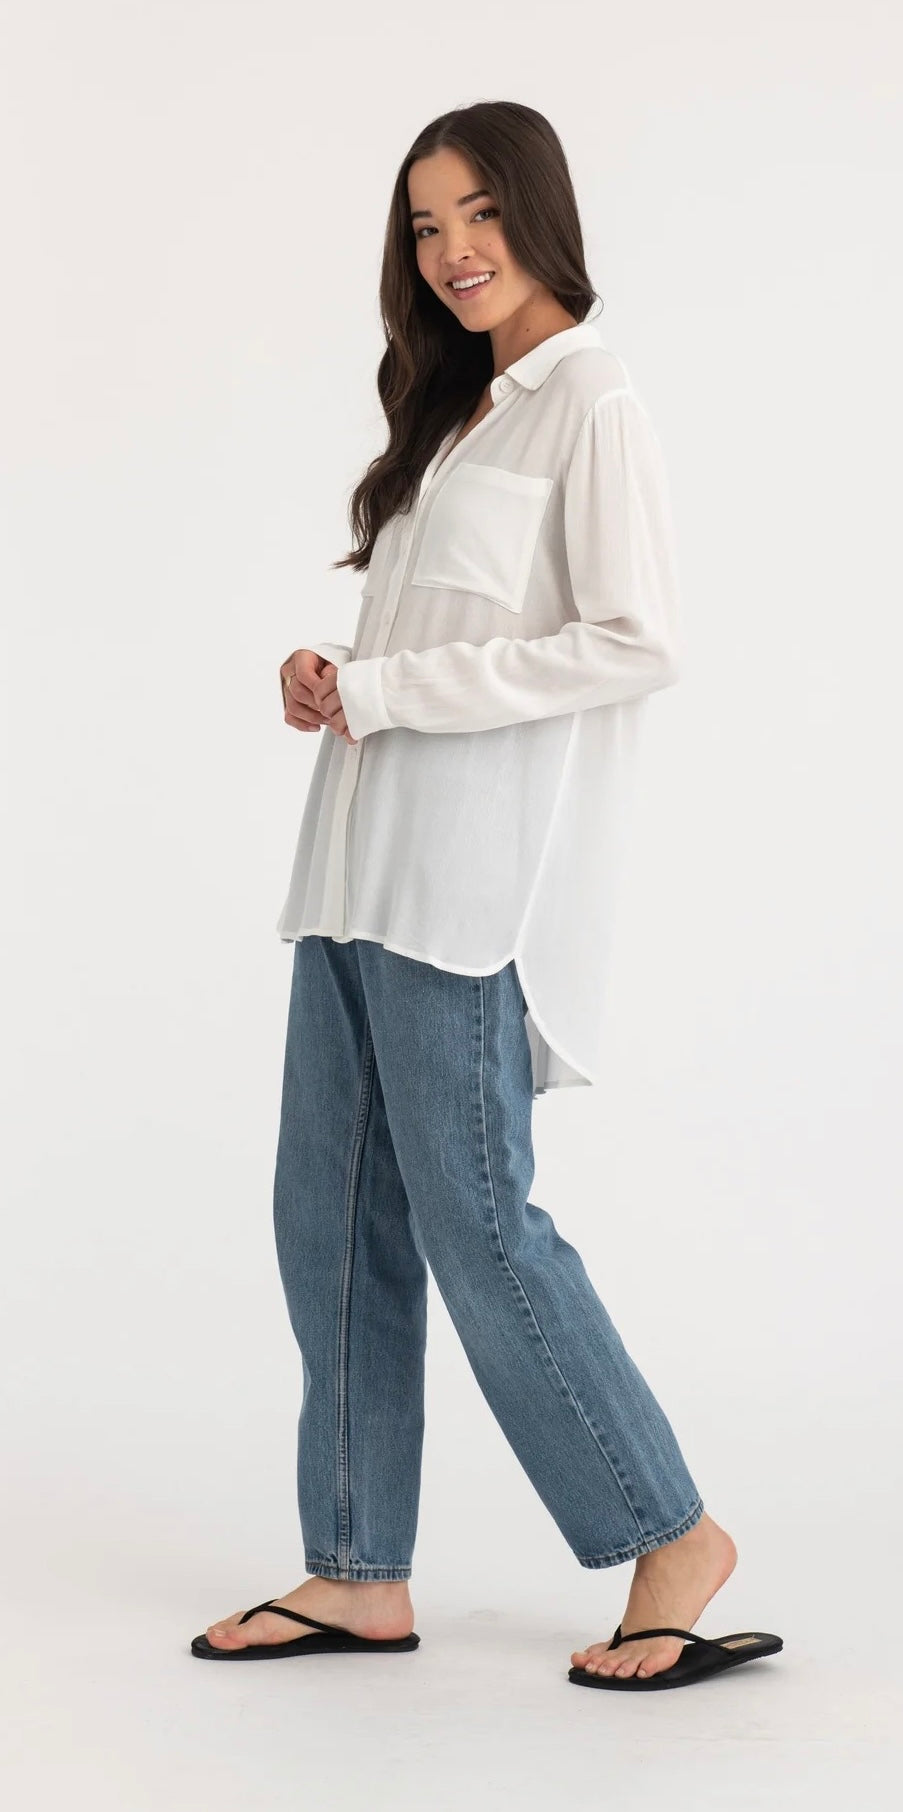 Orb- Bailey- Oversized Button Up- White